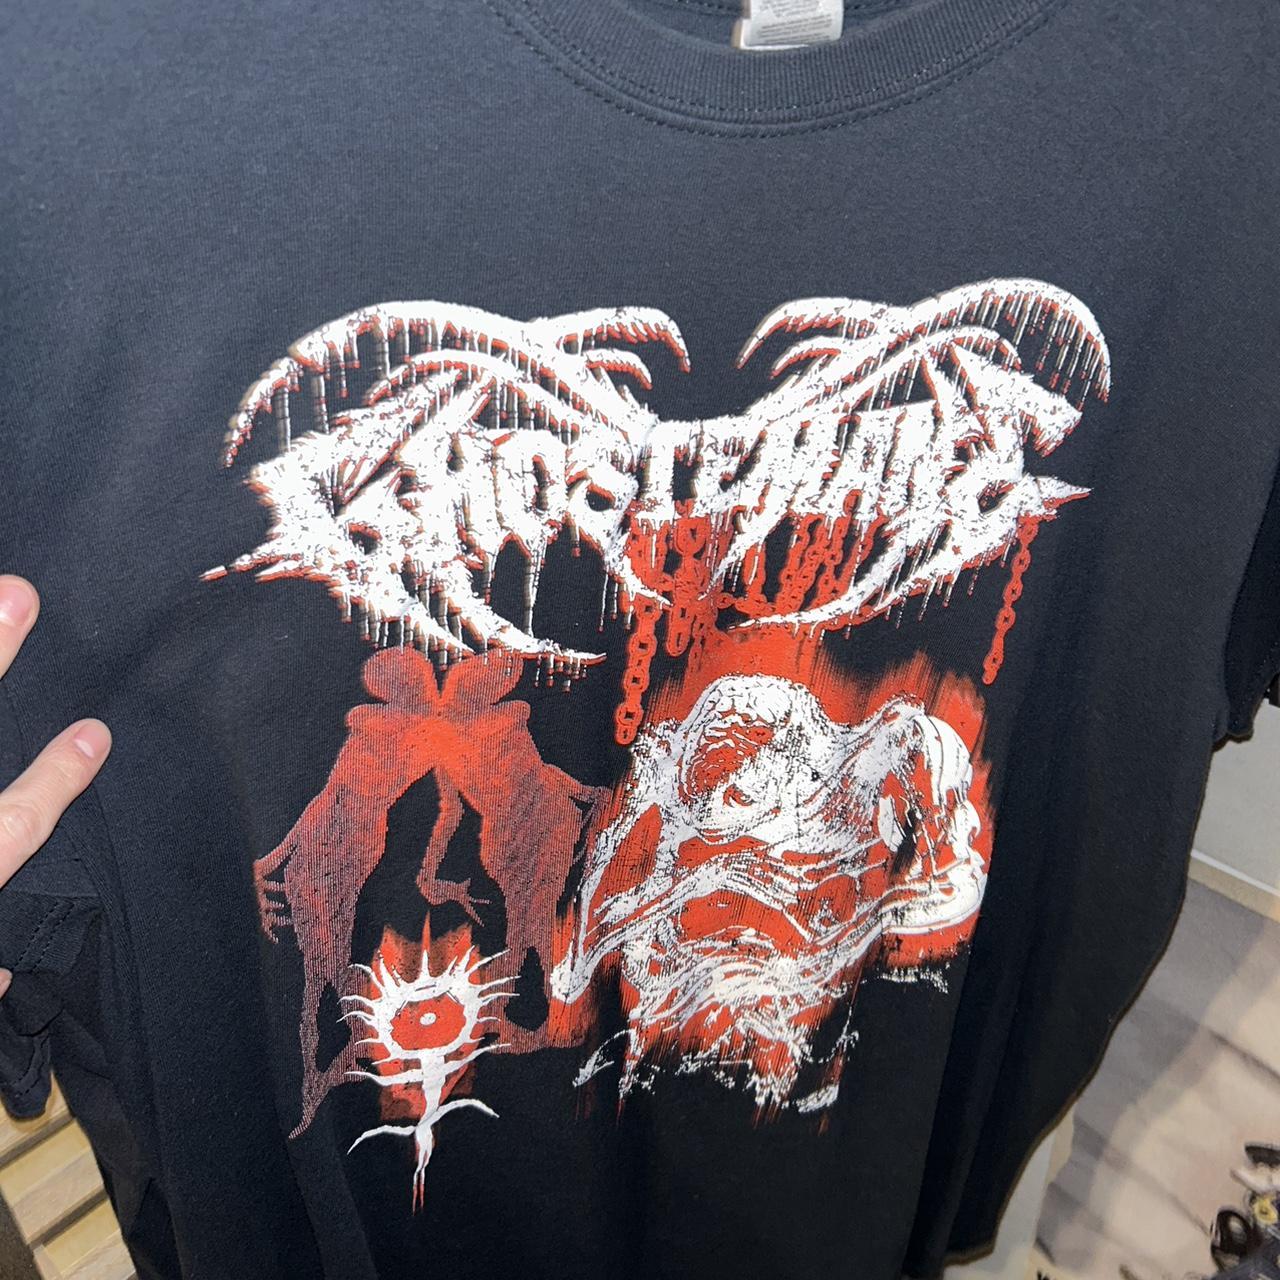 ghostemane tee from the tour he did with lil tracy - Depop